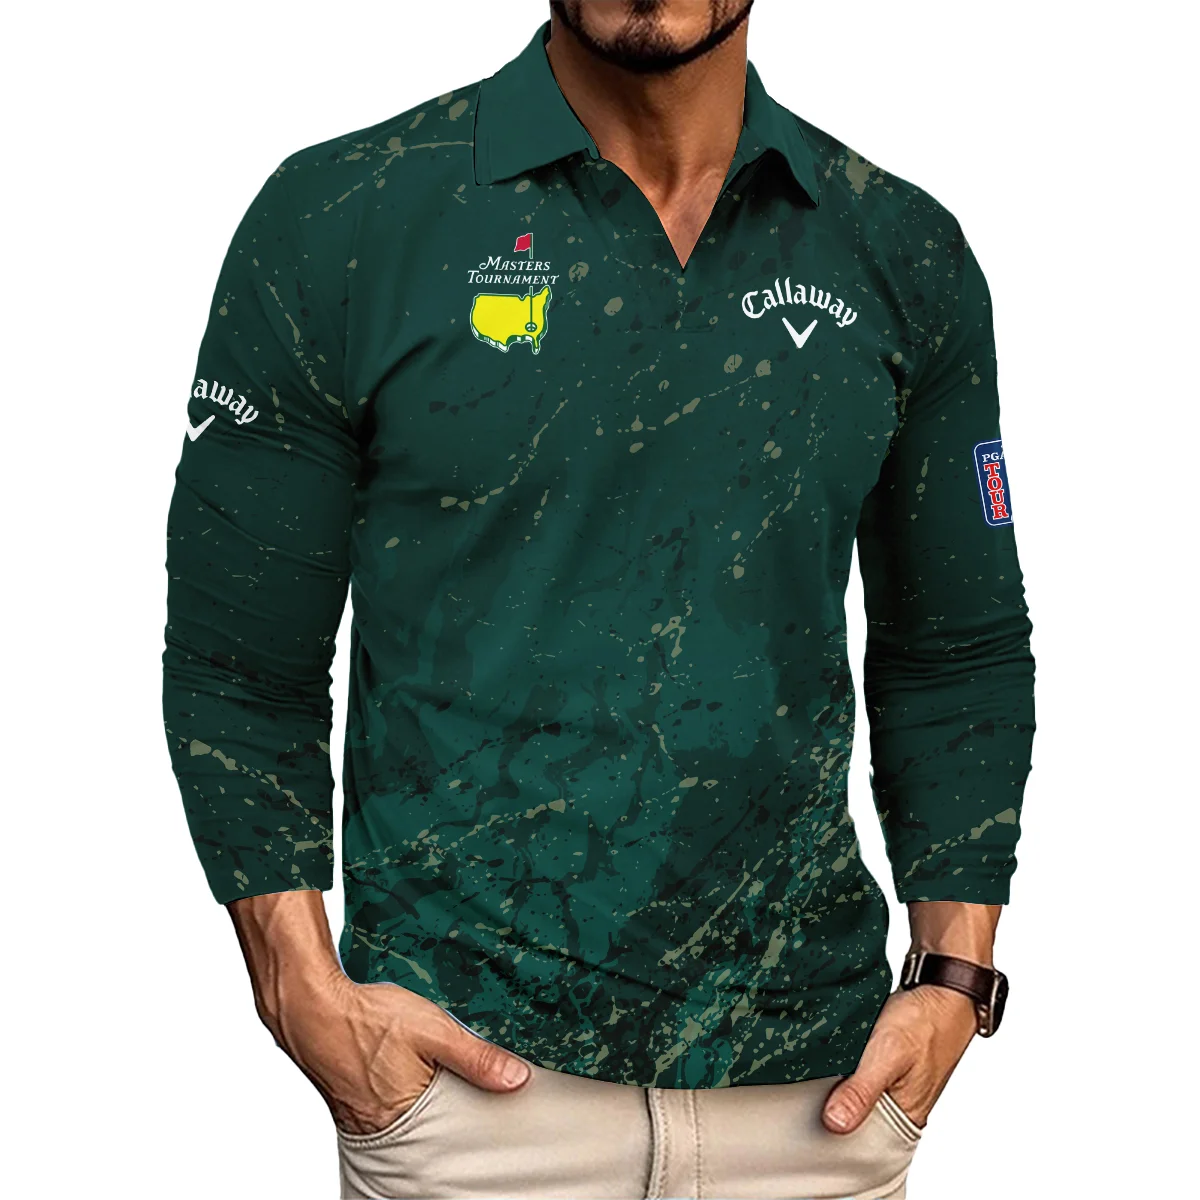 Old Cracked Texture With Gold Splash Paint Masters Tournament Callaway Vneck Long Polo Shirt Style Classic Long Polo Shirt For Men